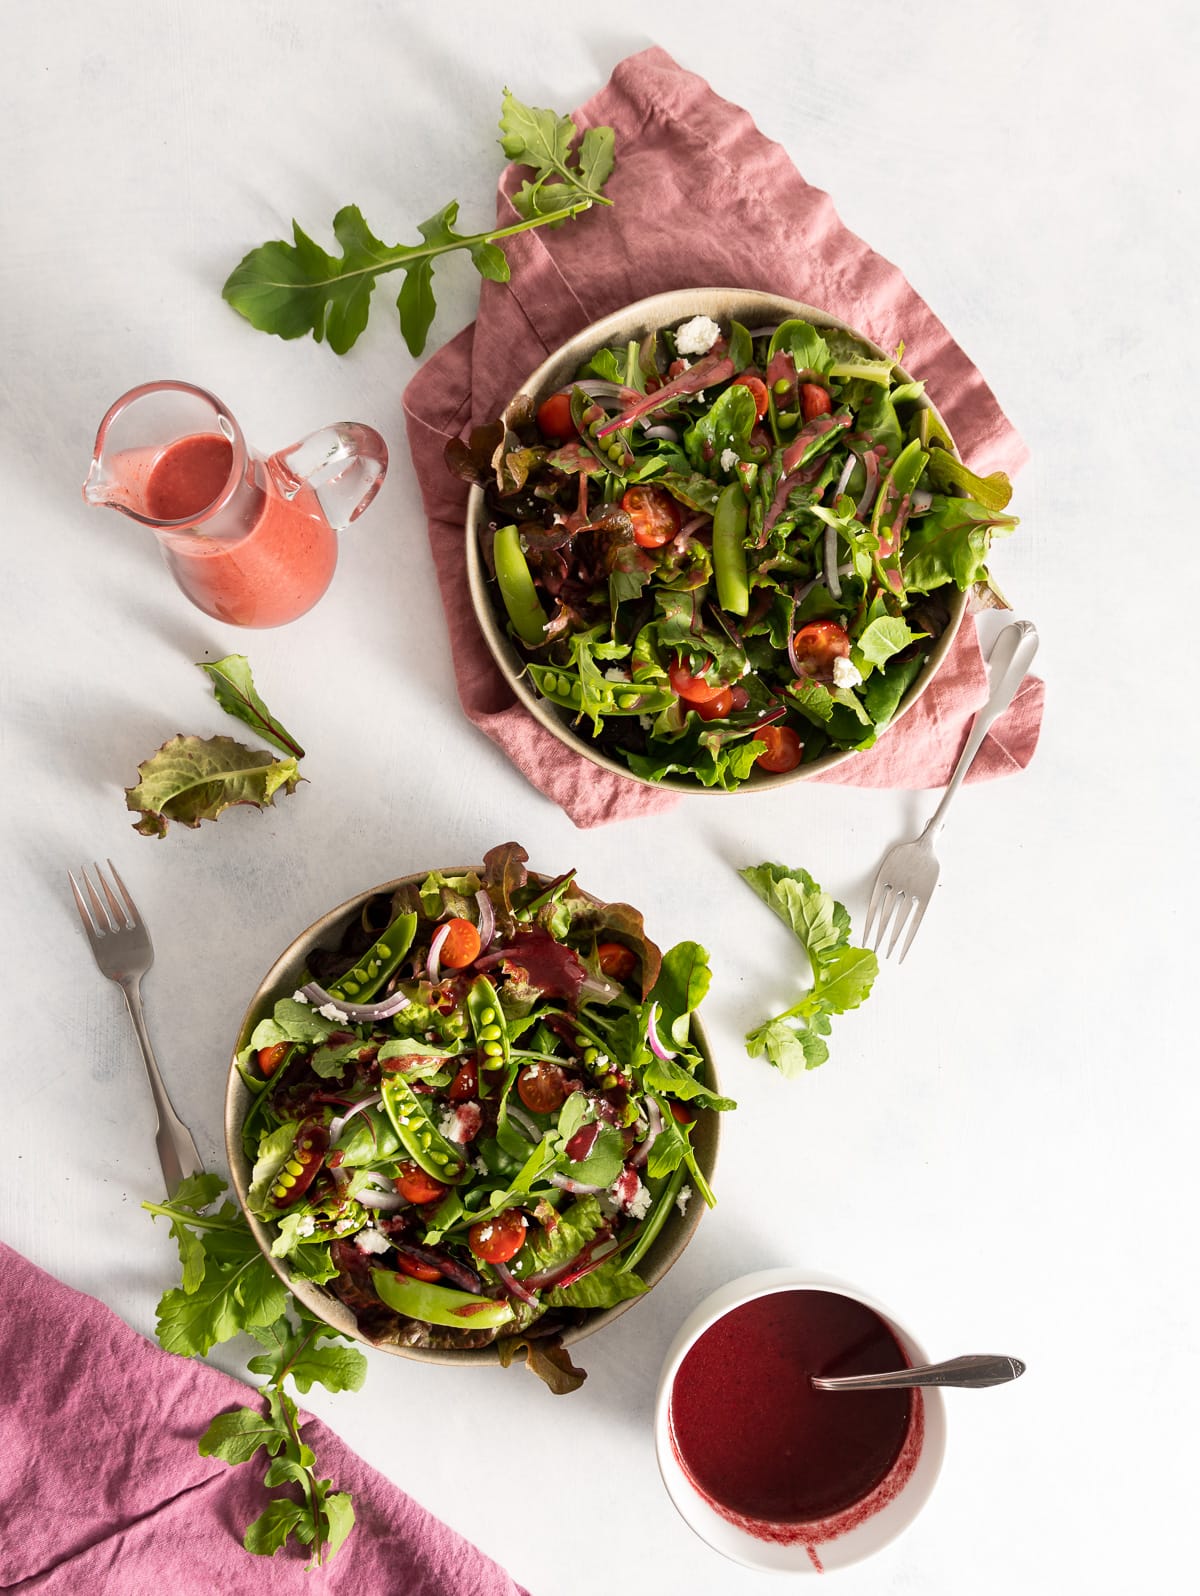 two bowls of salad greens with pink and dark red vinaigrette dressings 